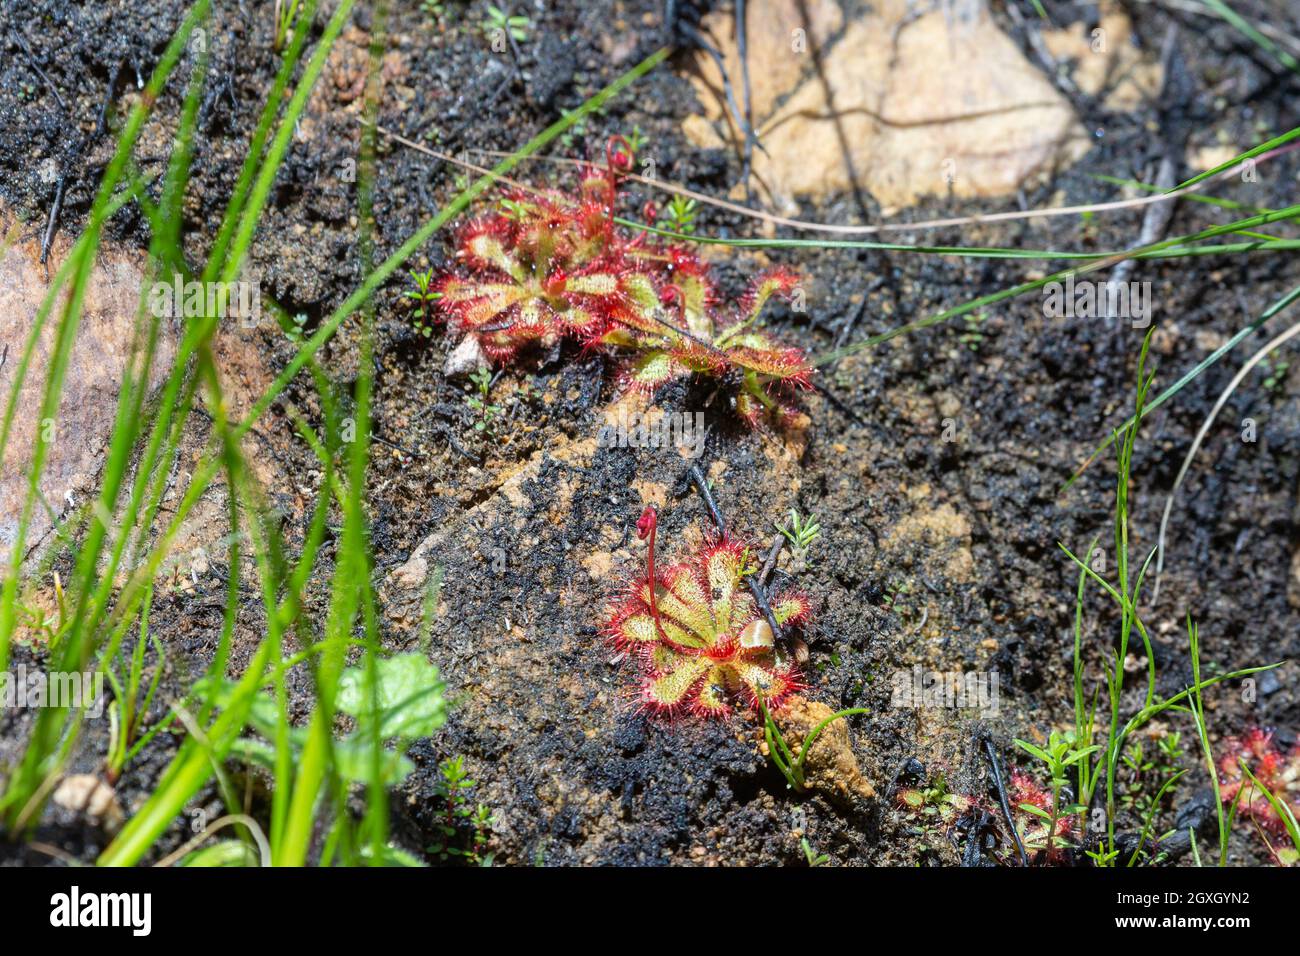 Some rosettes of a Drosera sp. in natural habitat close to Barrydale in the Western Cape of South Africa Stock Photo